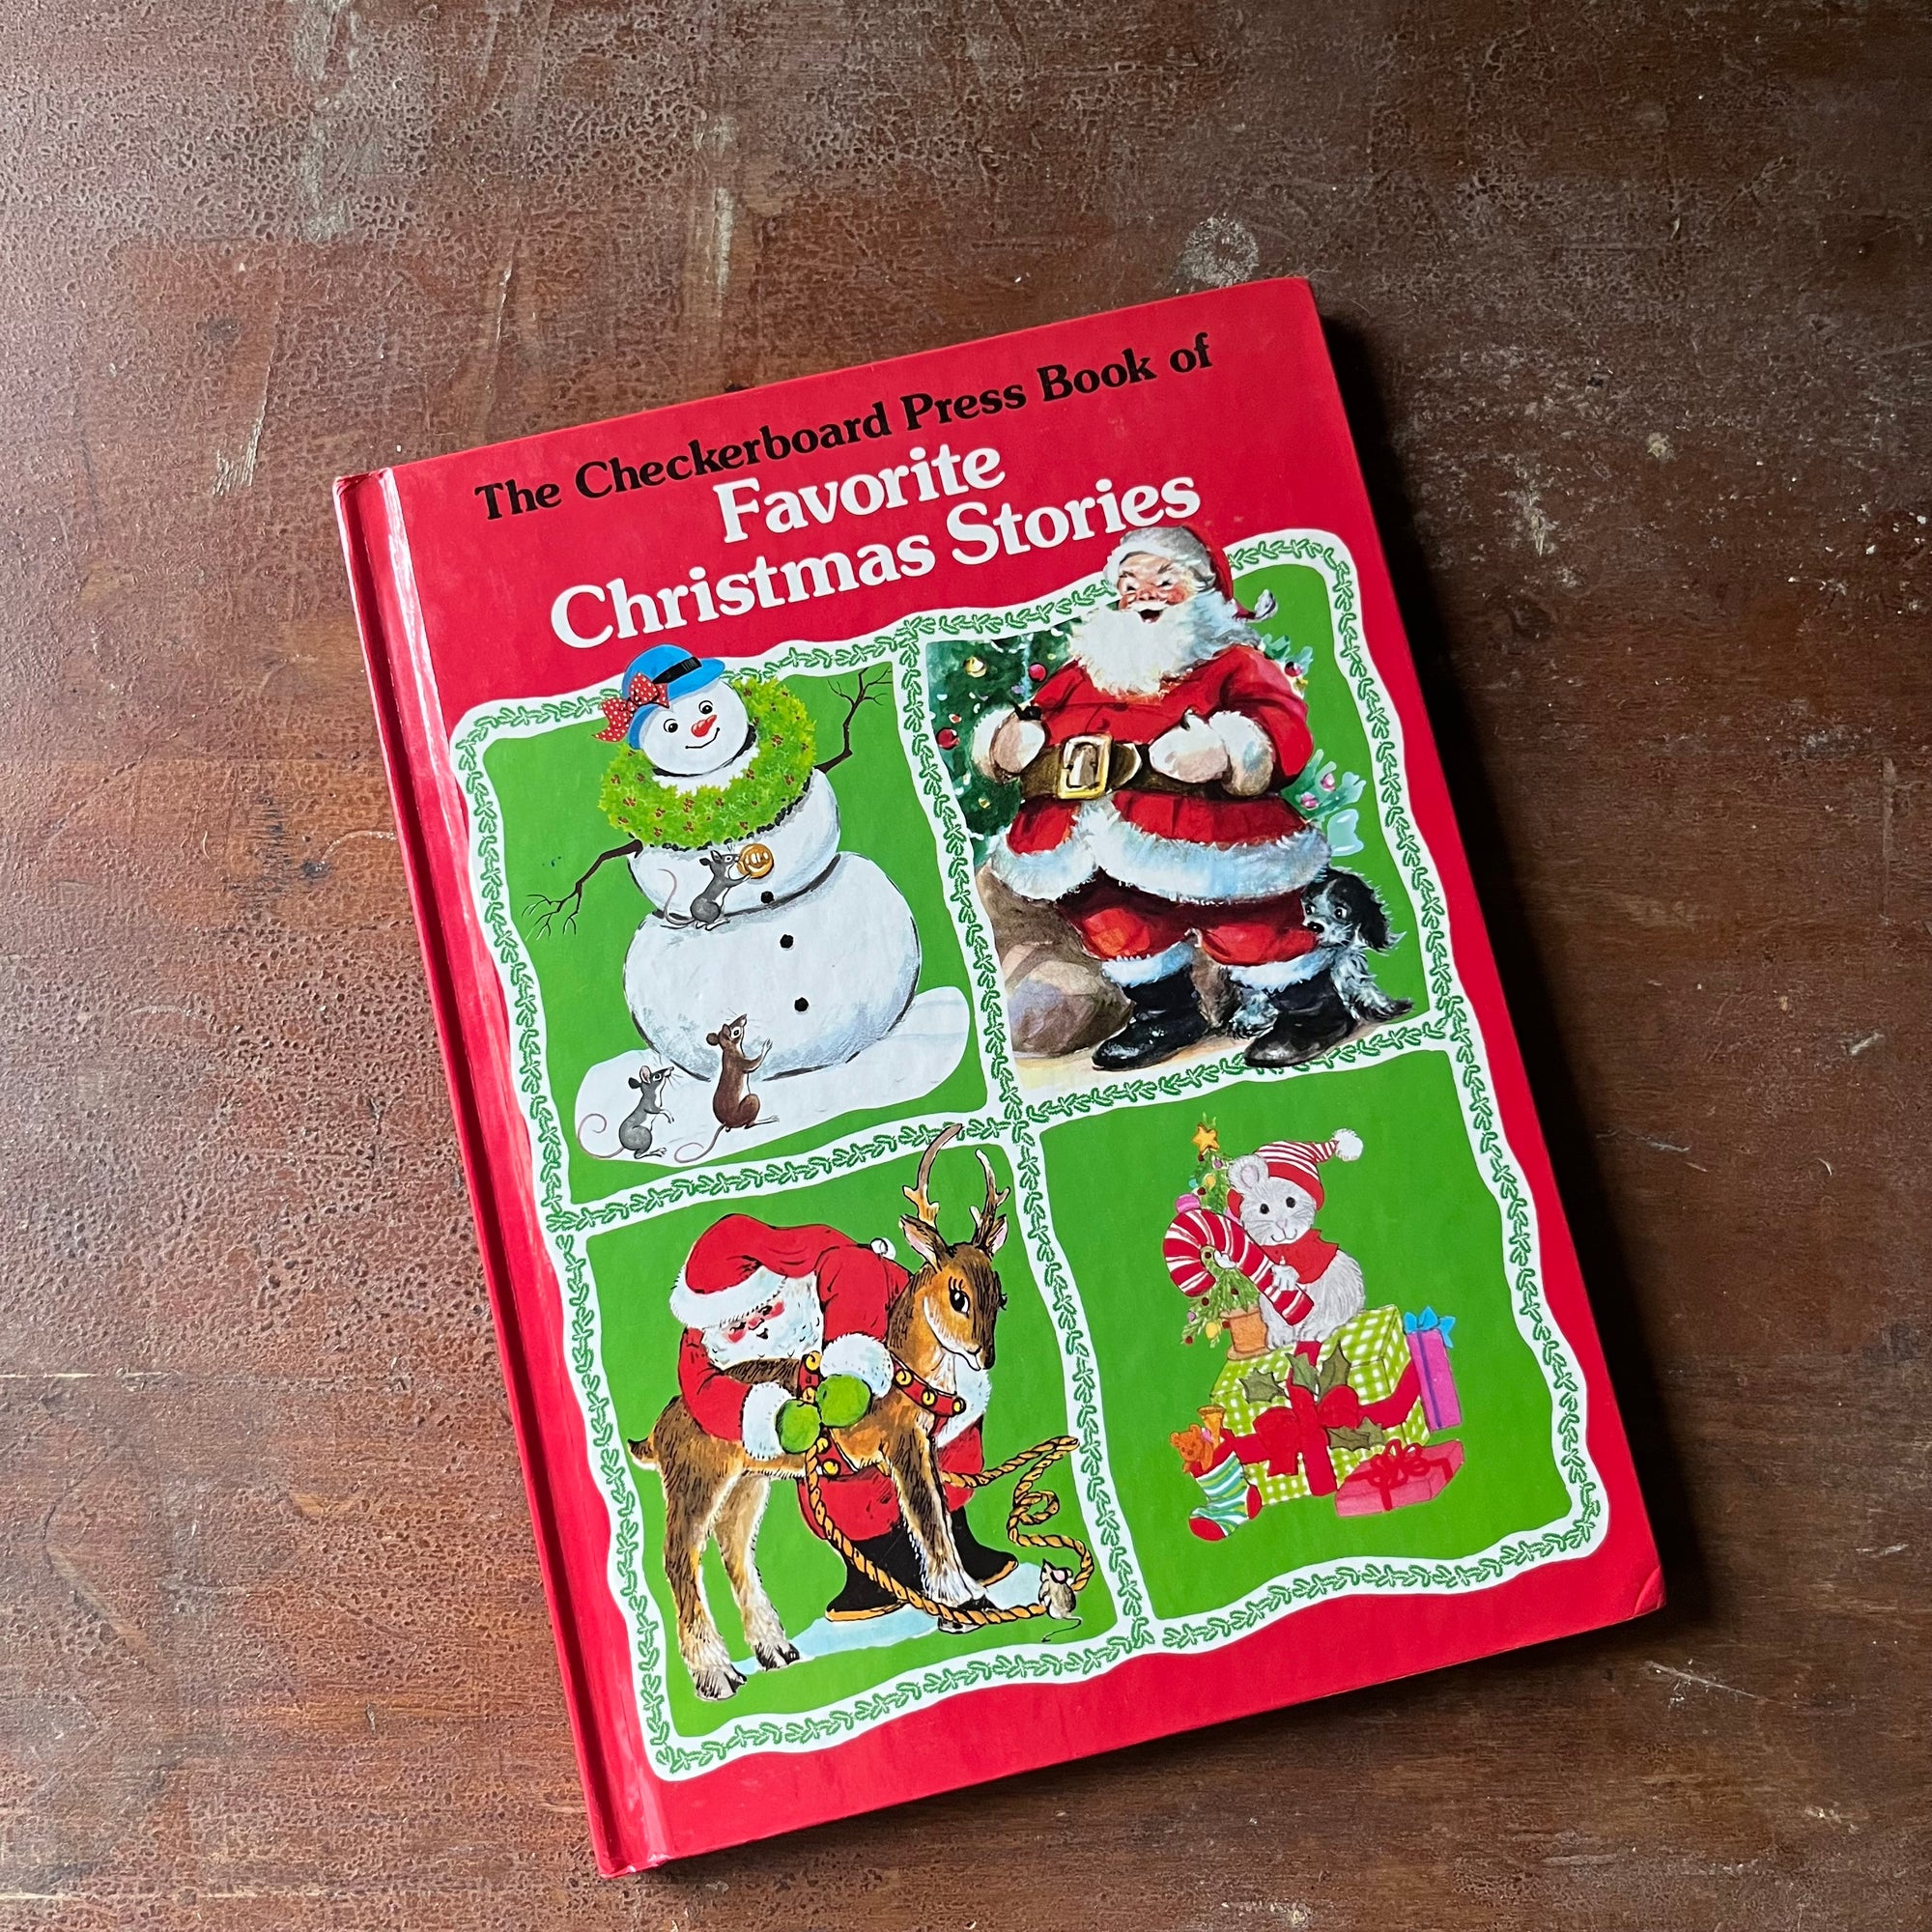 vintage Christmas stories, vintage children's book - The Checkerboard Press Book of Favorite Christmas Stories - view of the front cover